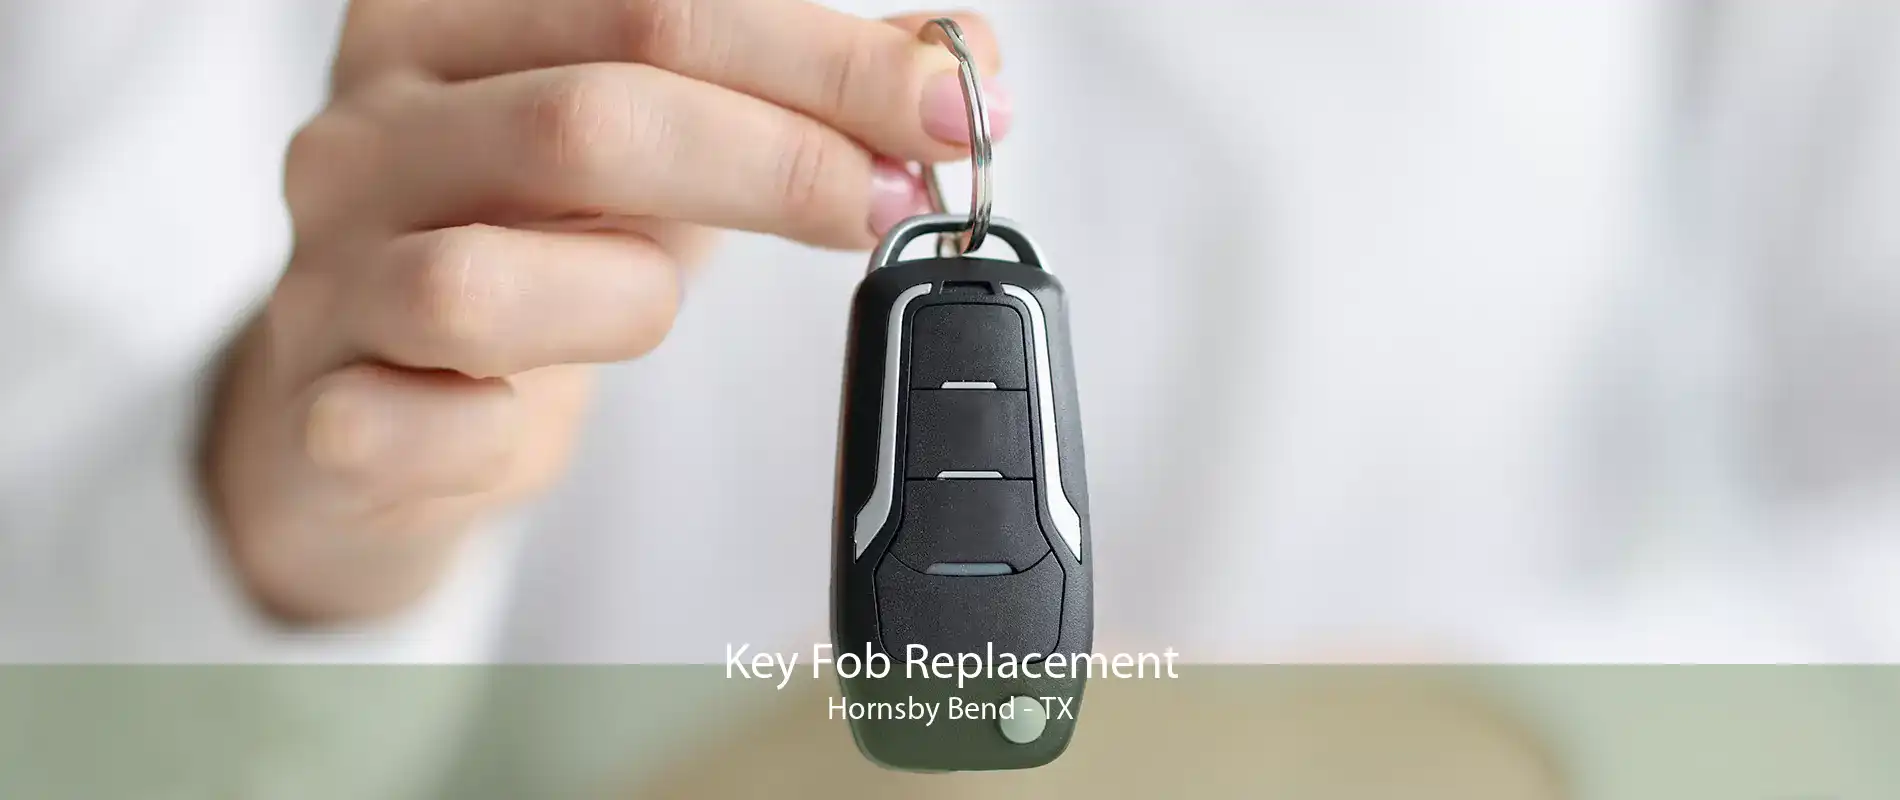 Key Fob Replacement Hornsby Bend - TX